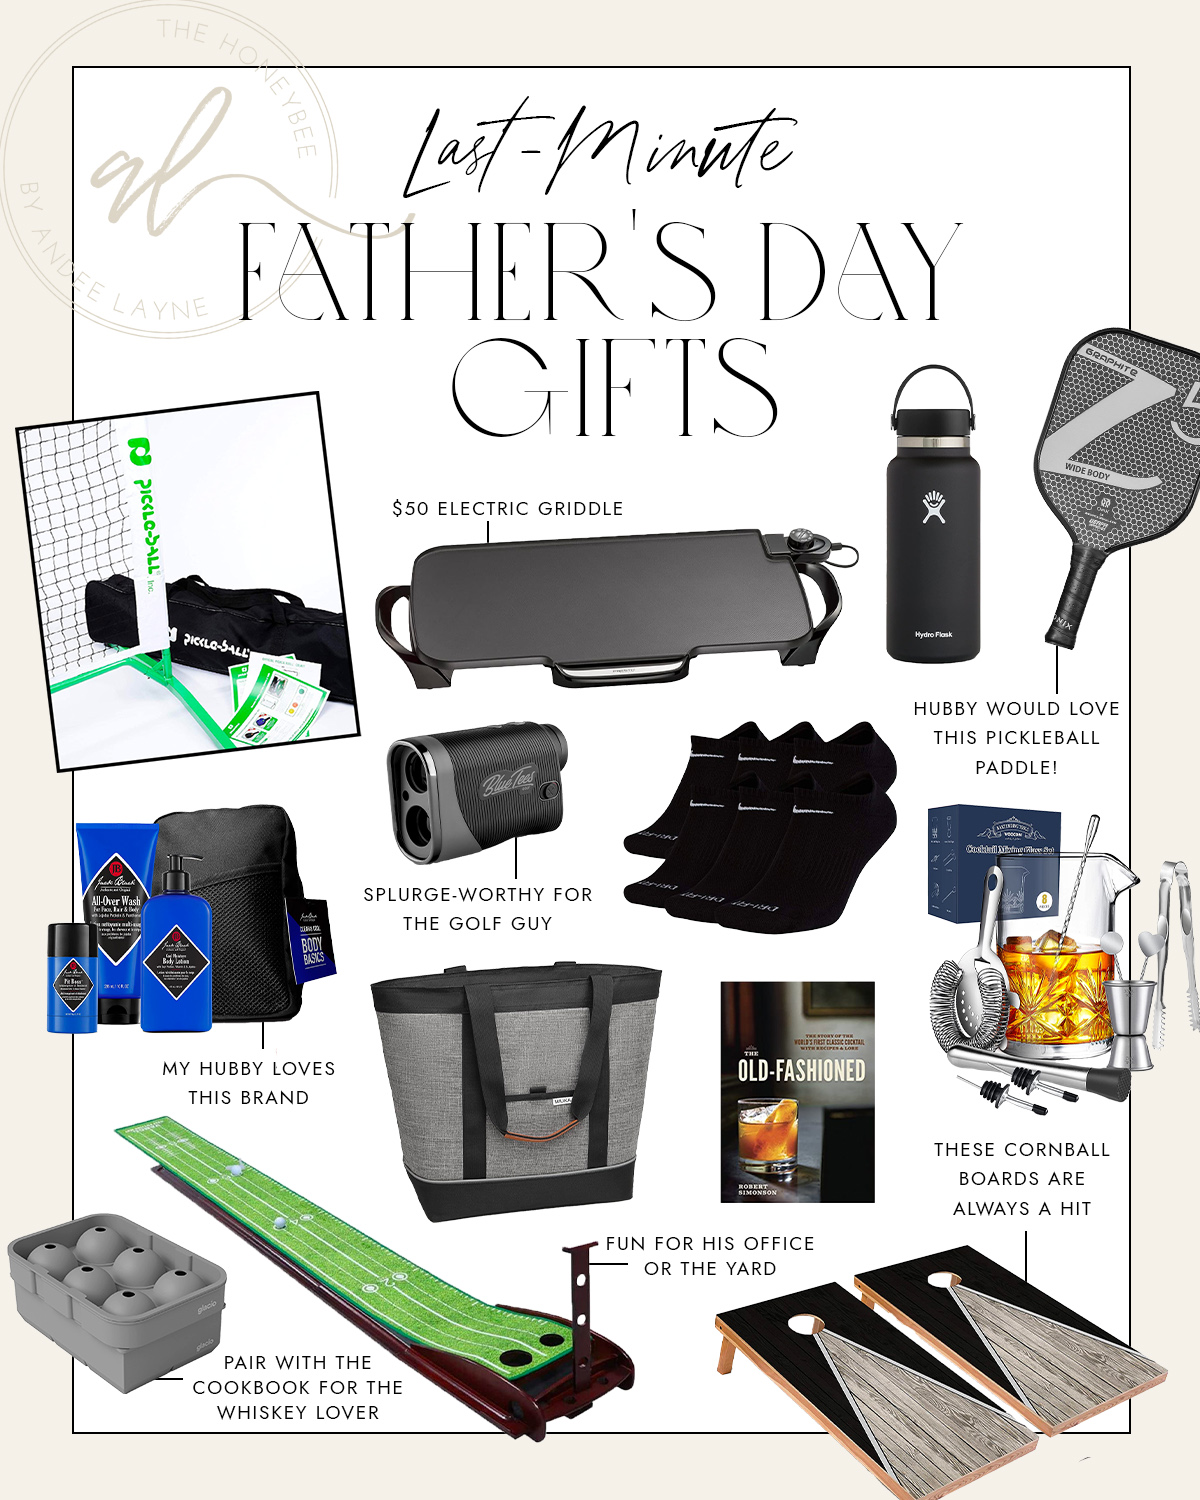 https://www.andeelayne.com/wp-content/uploads/2022/06/Last-Minute-Fathers-Day-Gifts-copy-1.jpg